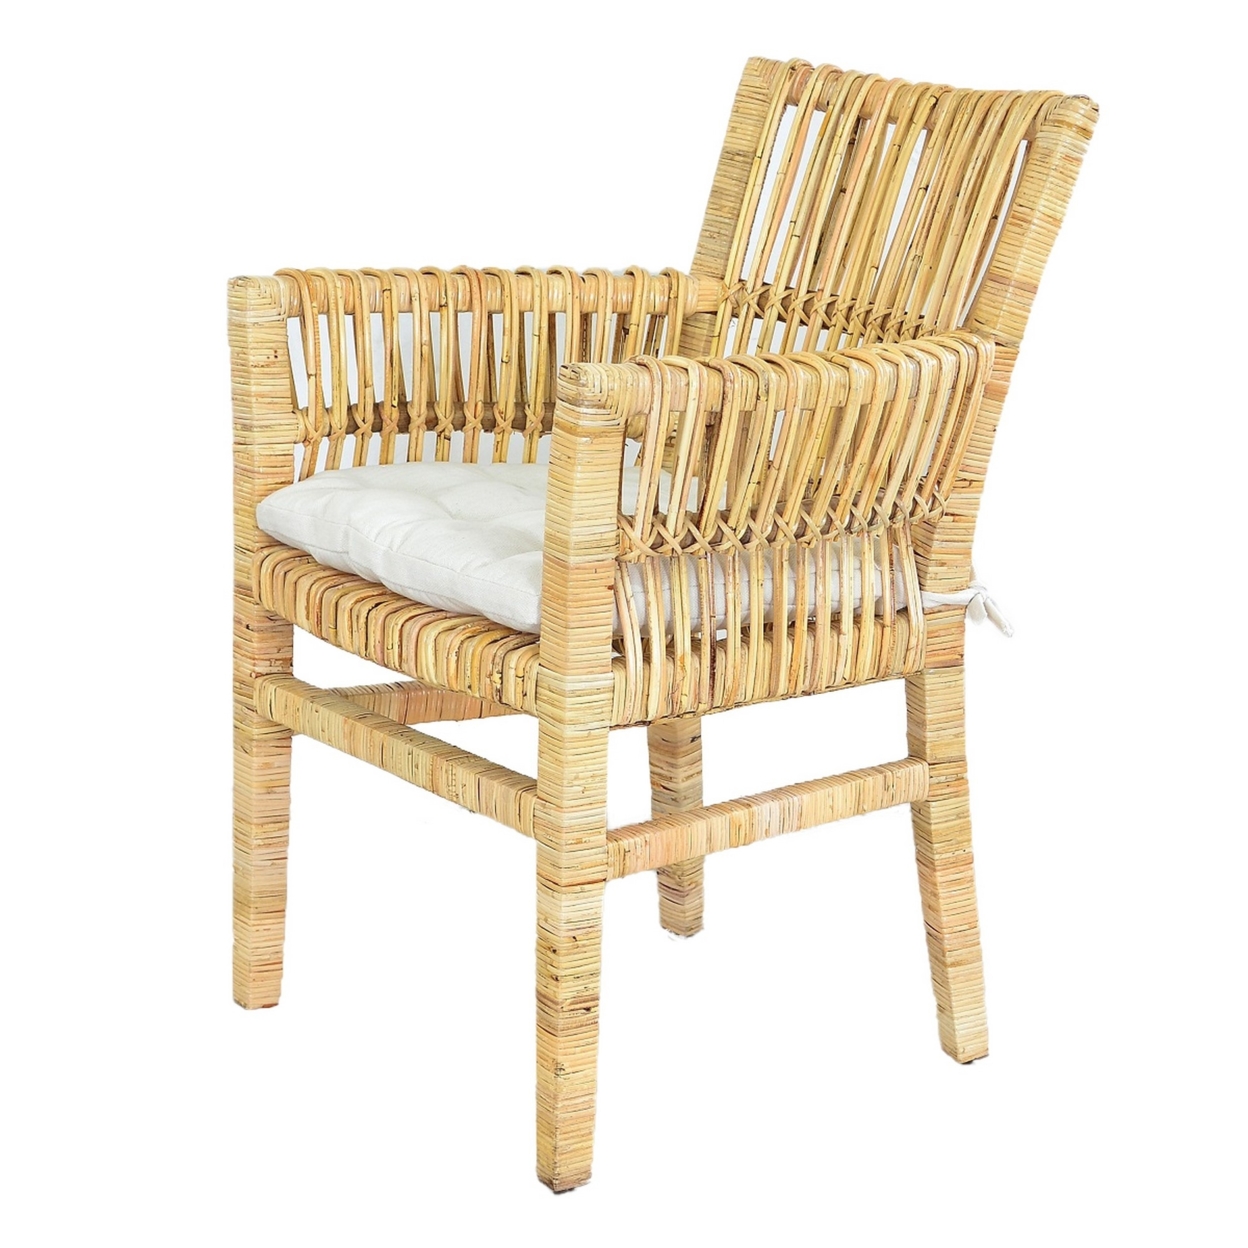 25 Inch Accent Armchair, Rattan With Wood Frame, Natural Brown, Saltoro Sherpi